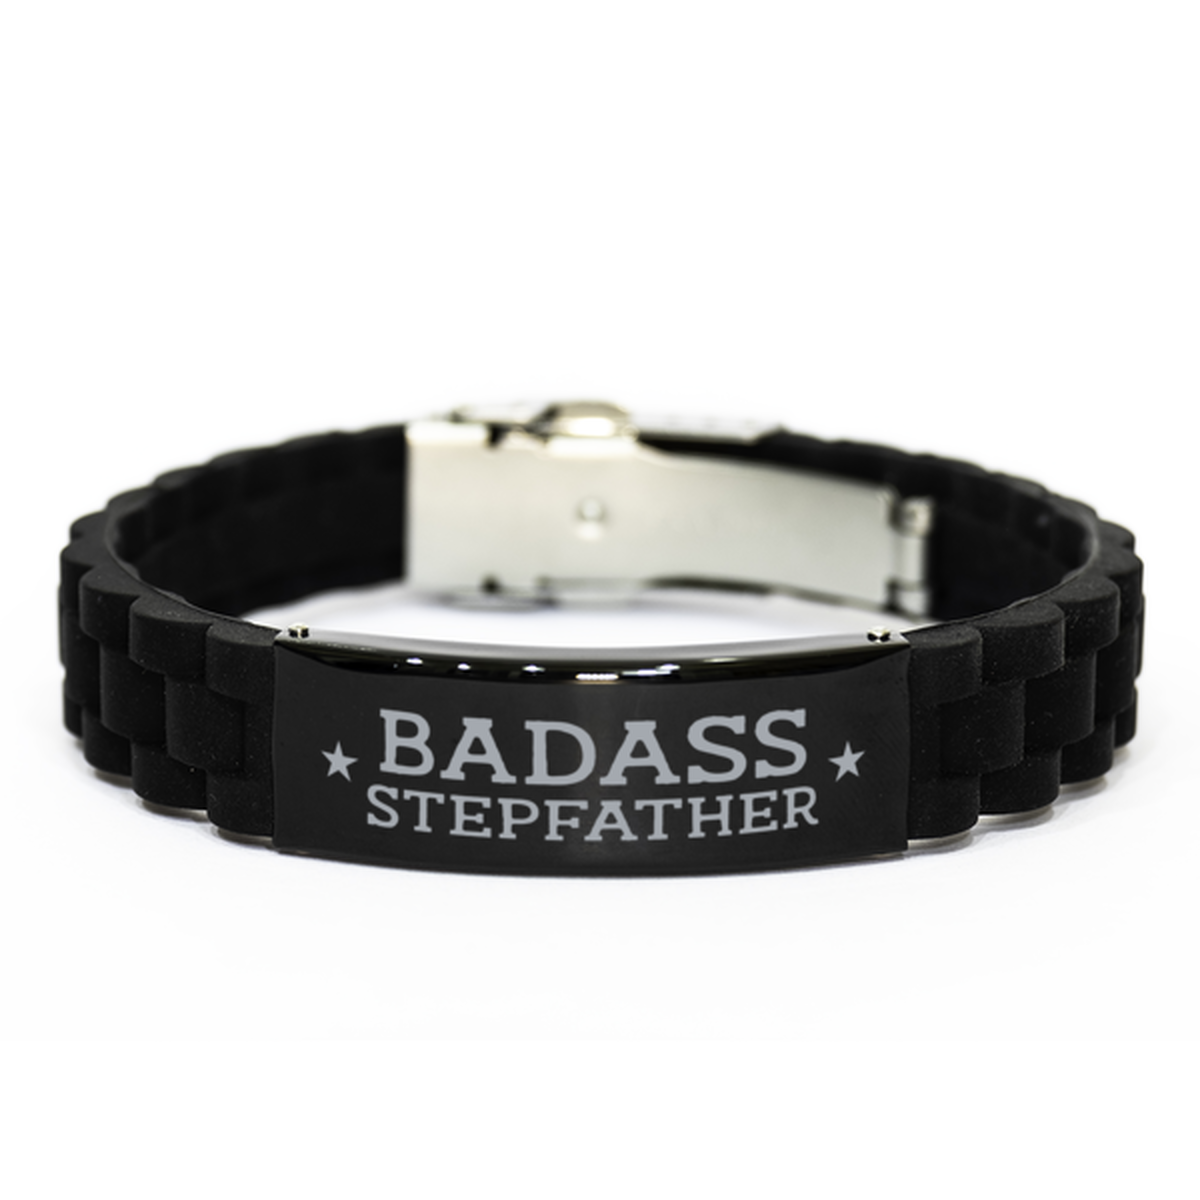 Stepfather Black Bracelet, Badass Stepfather, Funny Family Gifts For Stepfather From Son Daughter